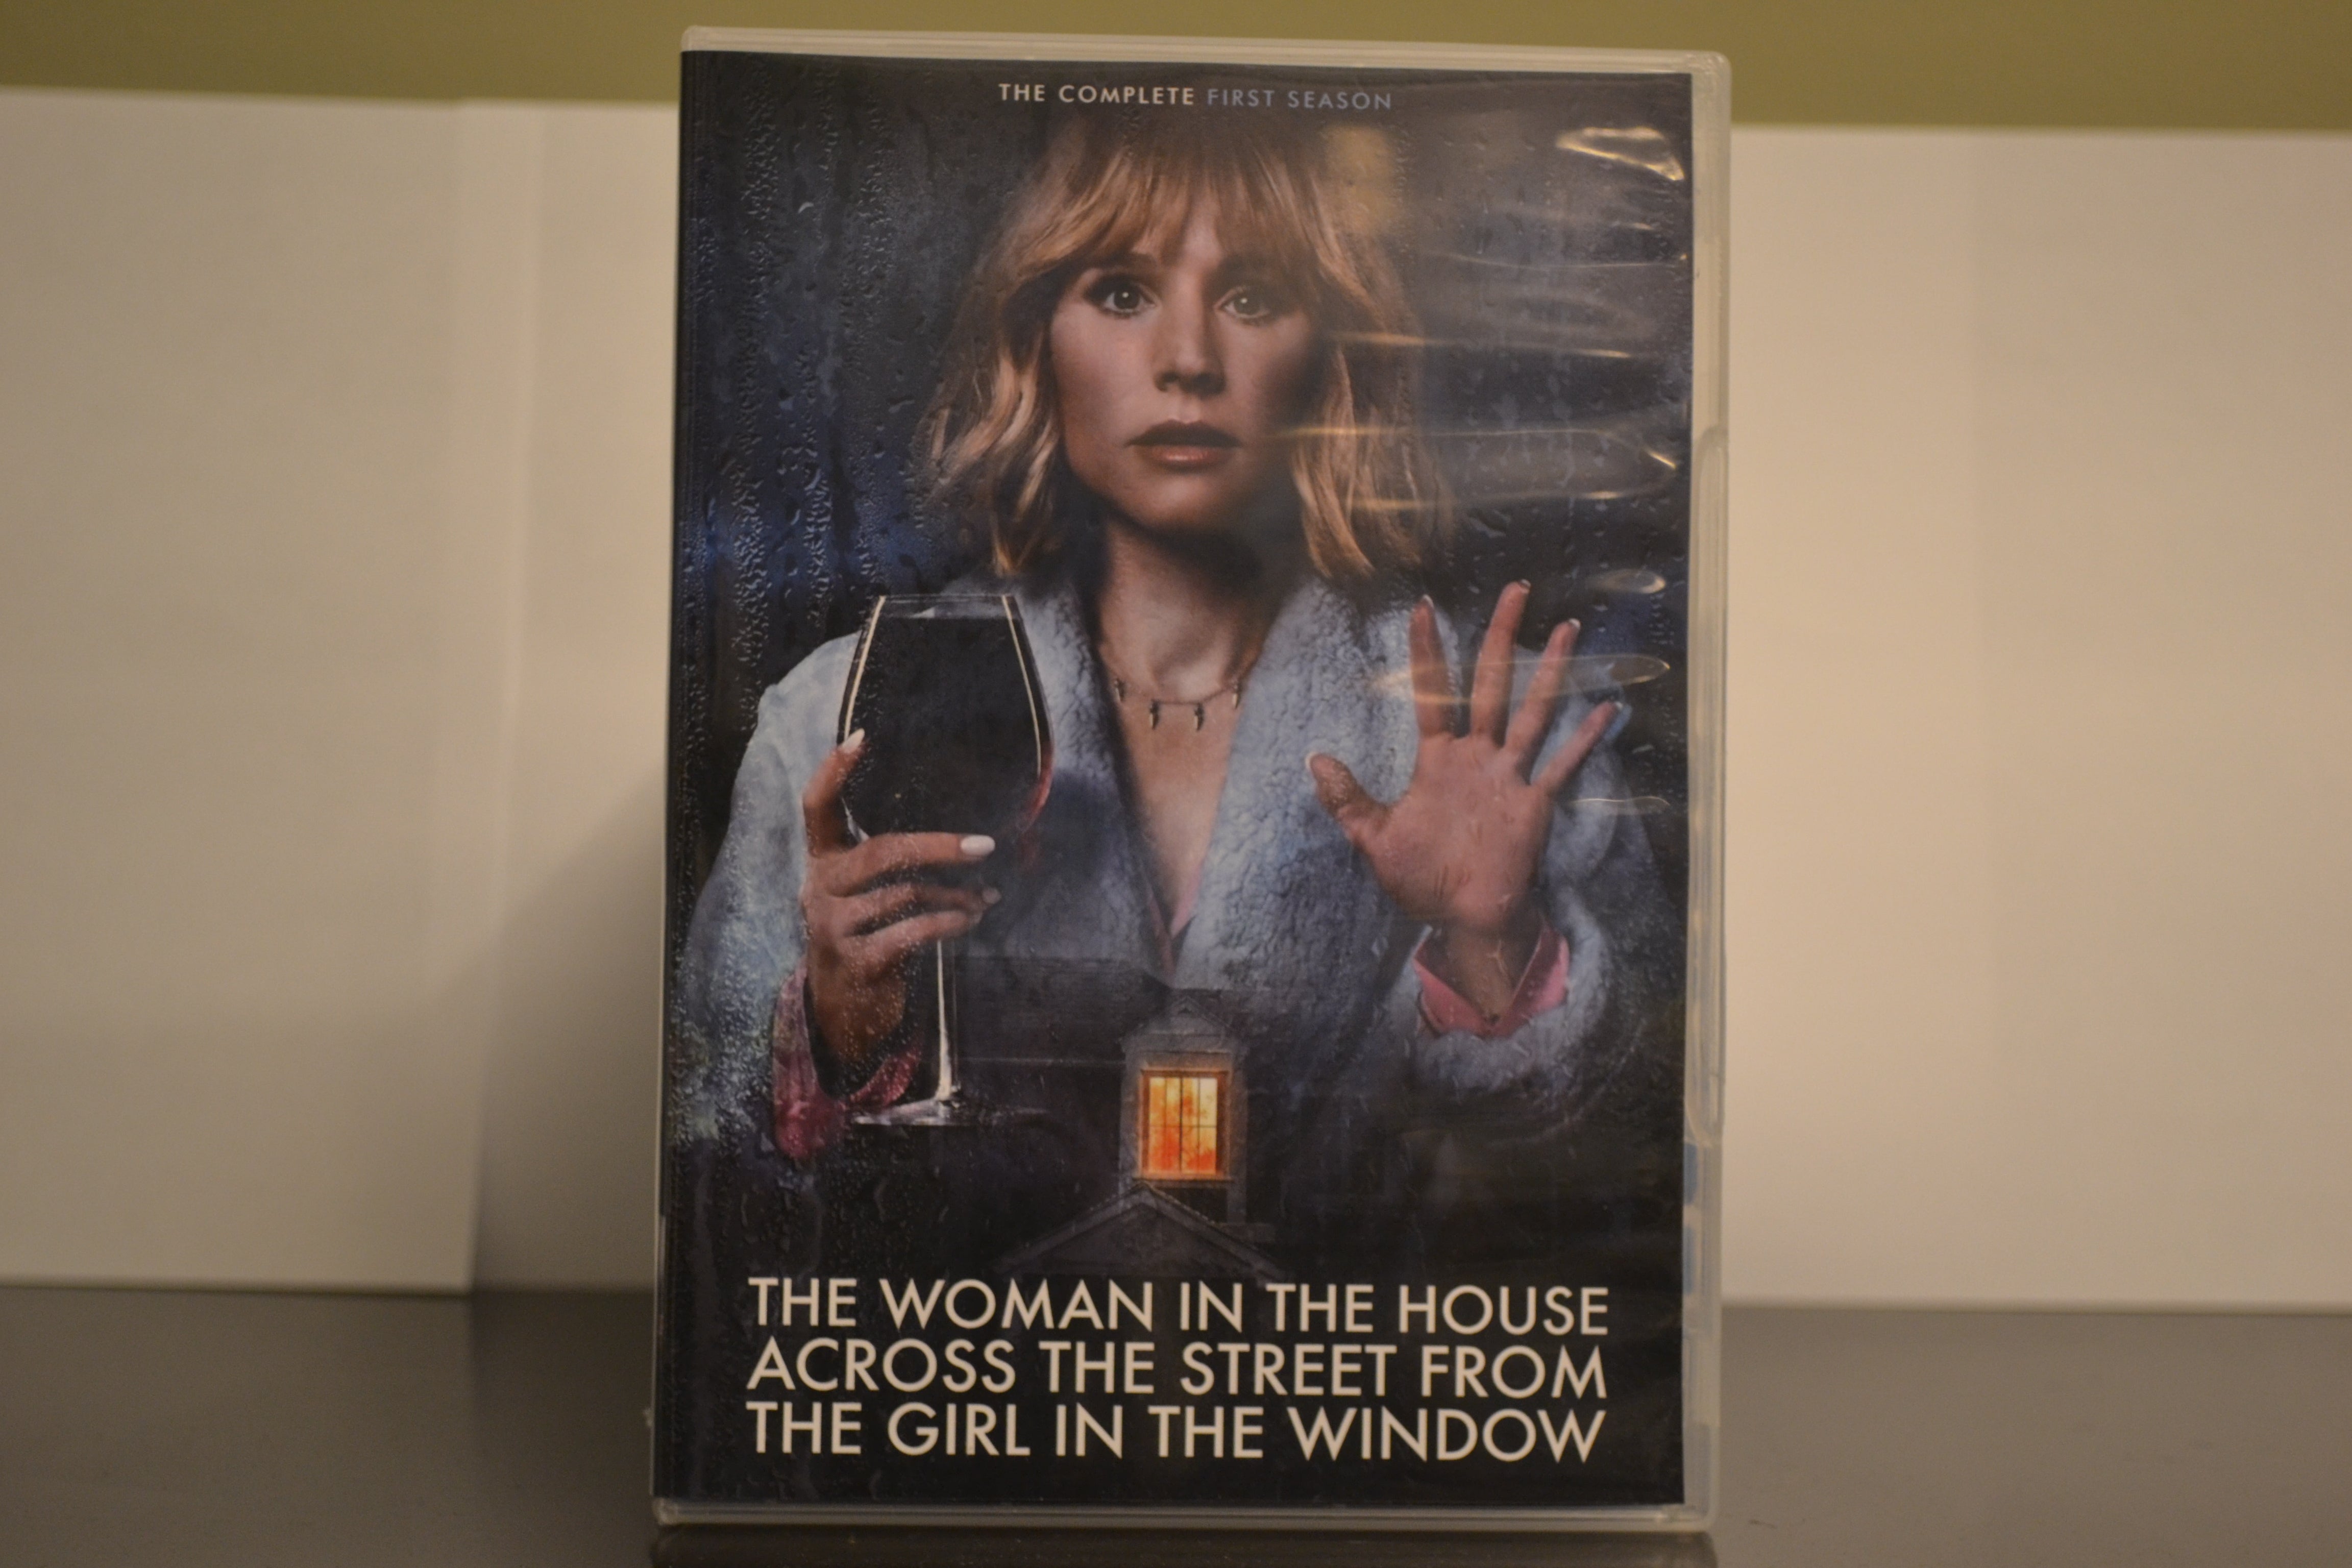 The Woman In The House Across The Street From The Girl In The Window Season 1 DvD Set